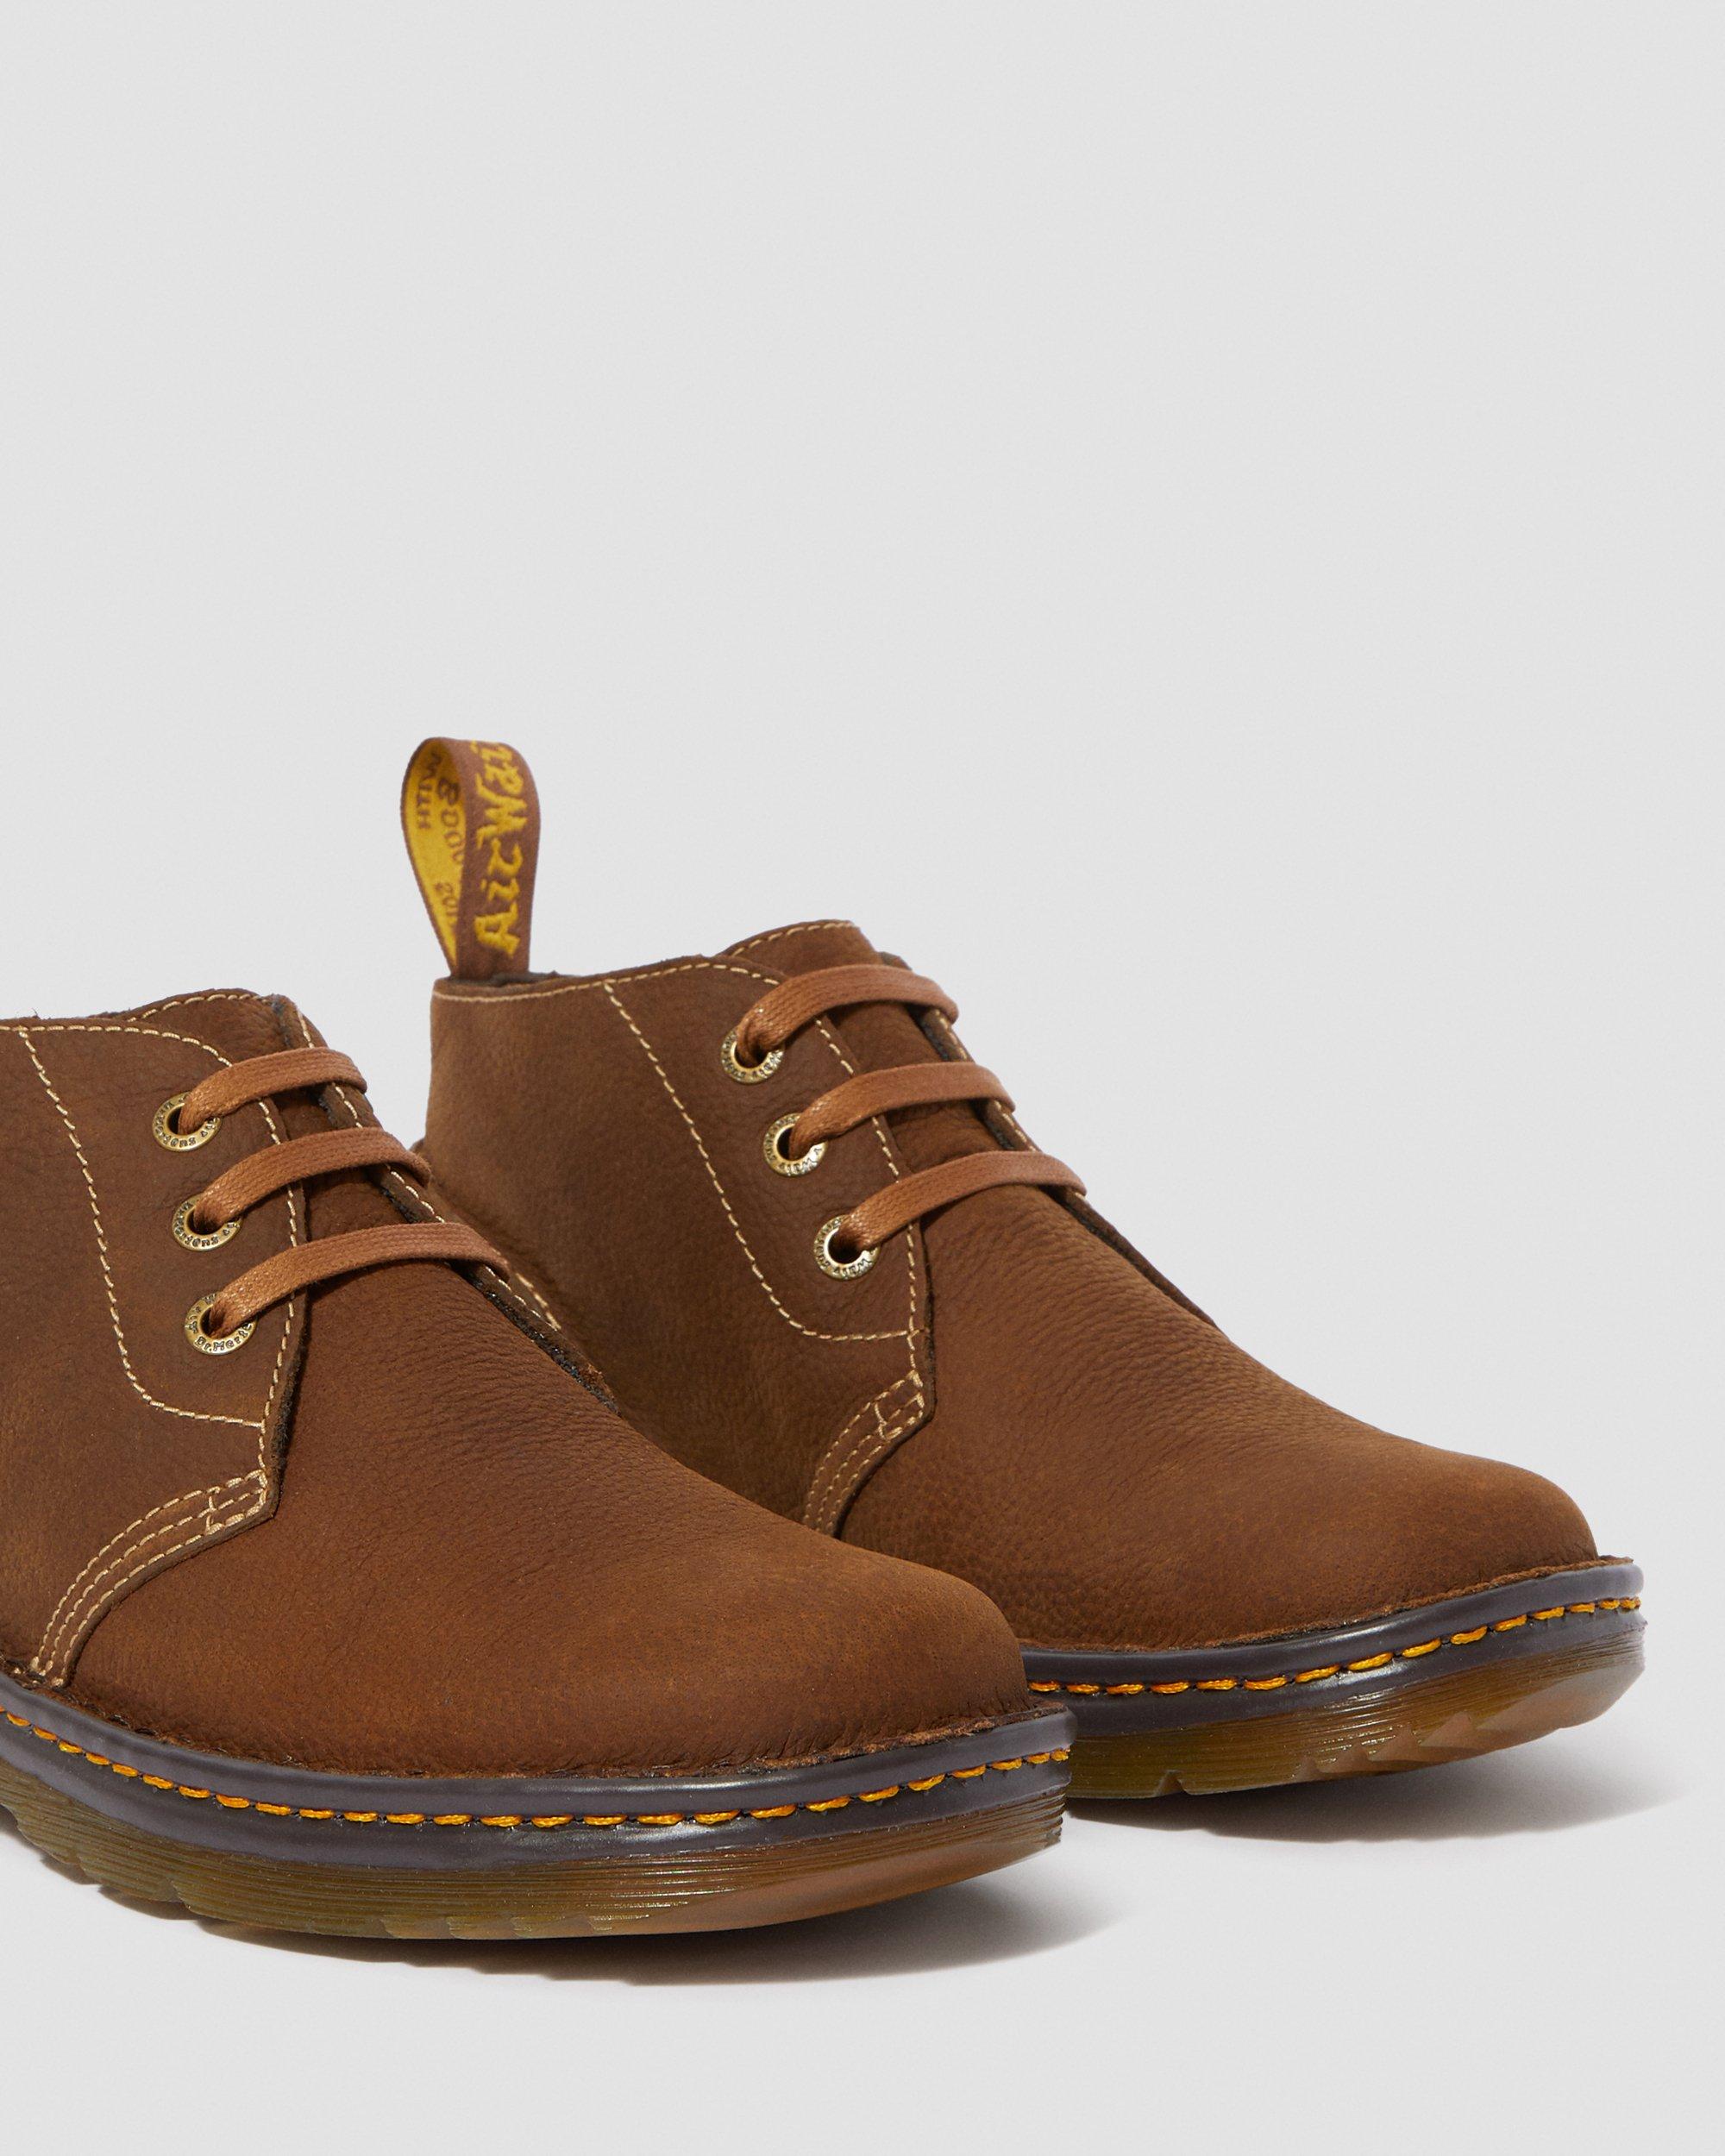 SUSSEX SLIP RESISTANT CHUKKA BOOTS | Dr 